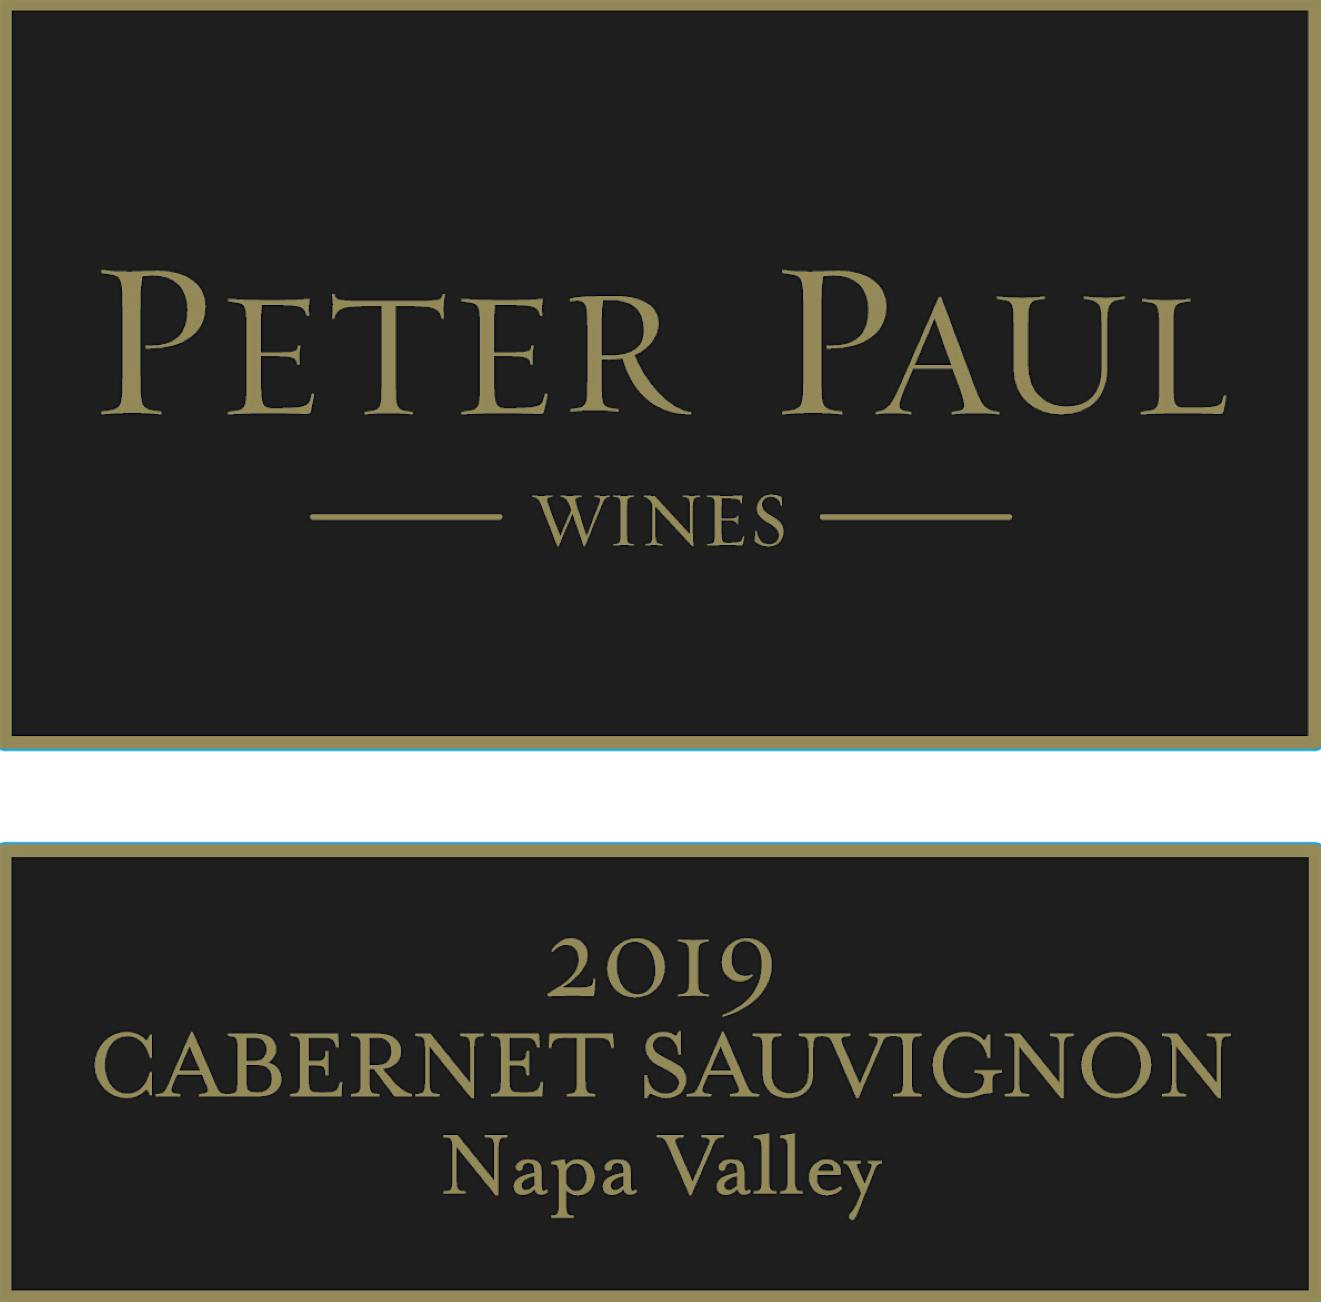 Label for Peter Paul